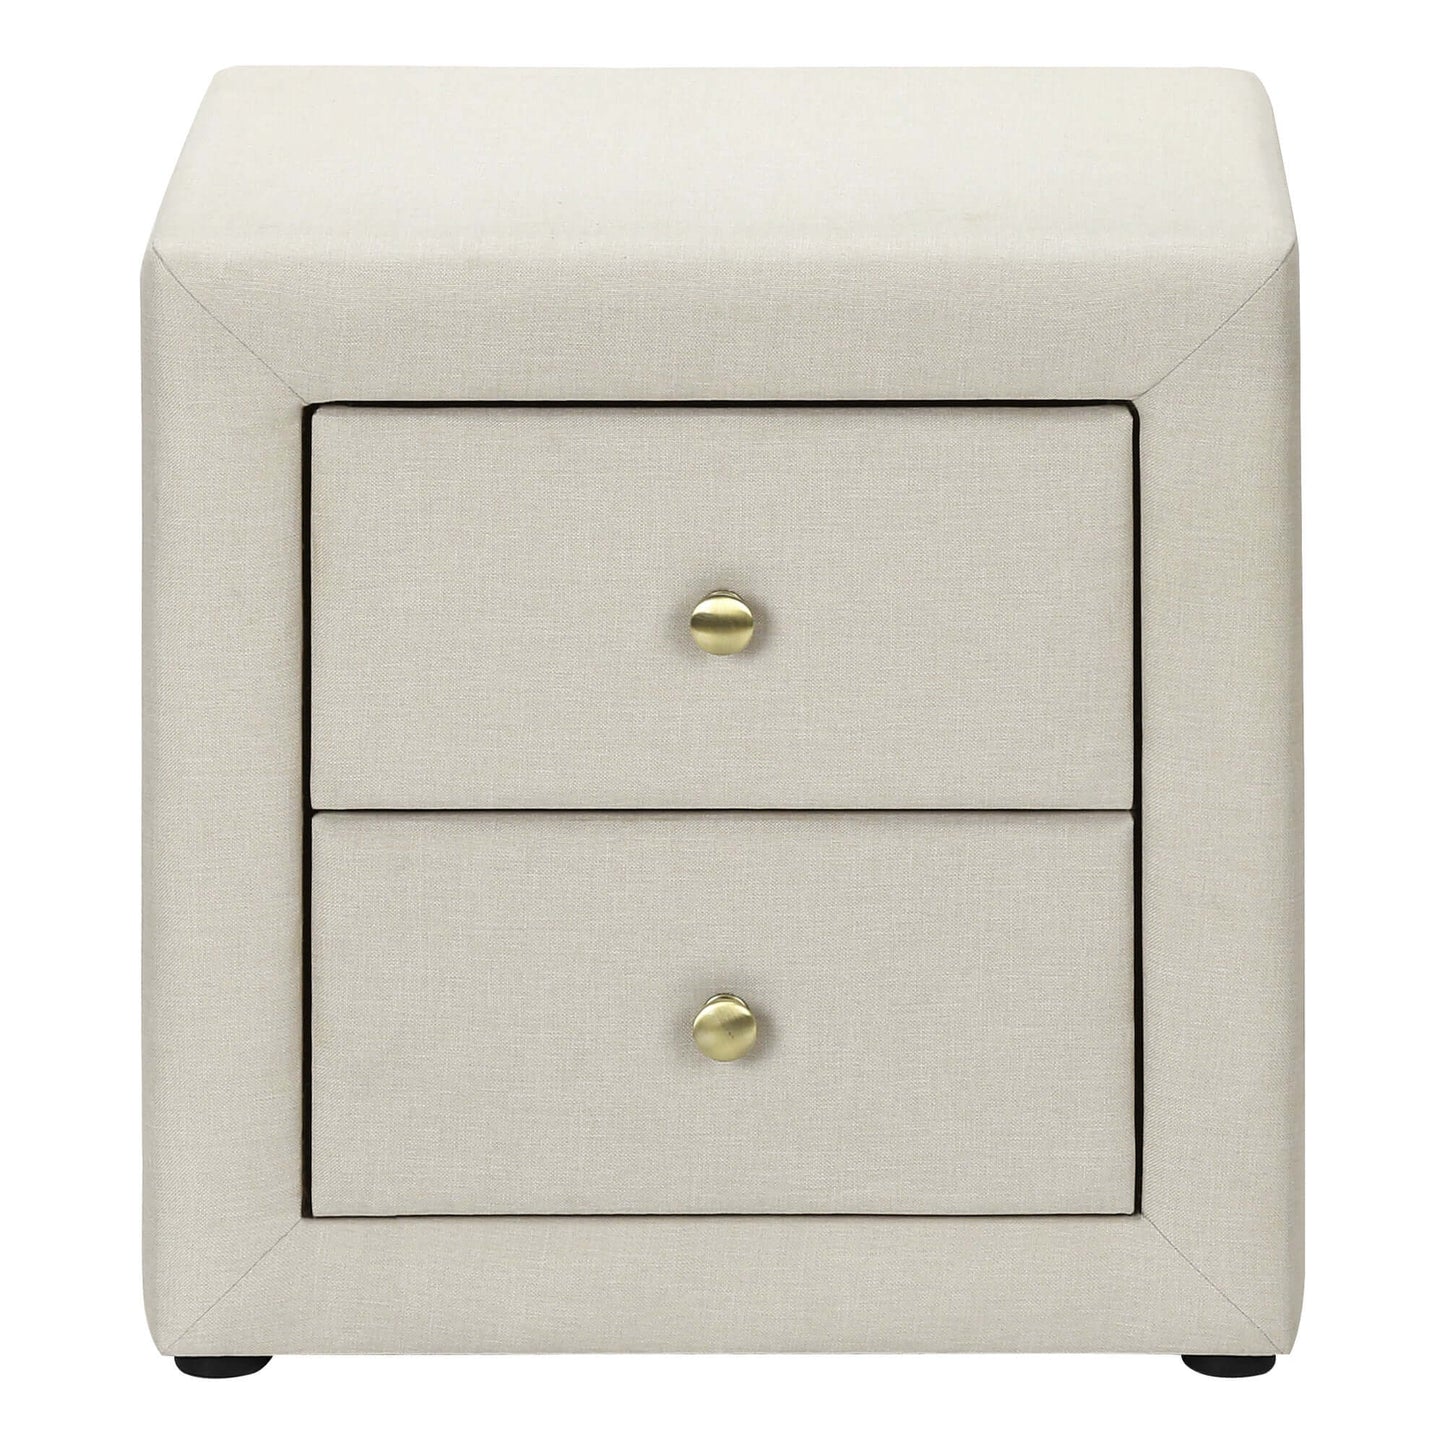 Transitional Nightstand in Beige Linen Fabric Upholstery